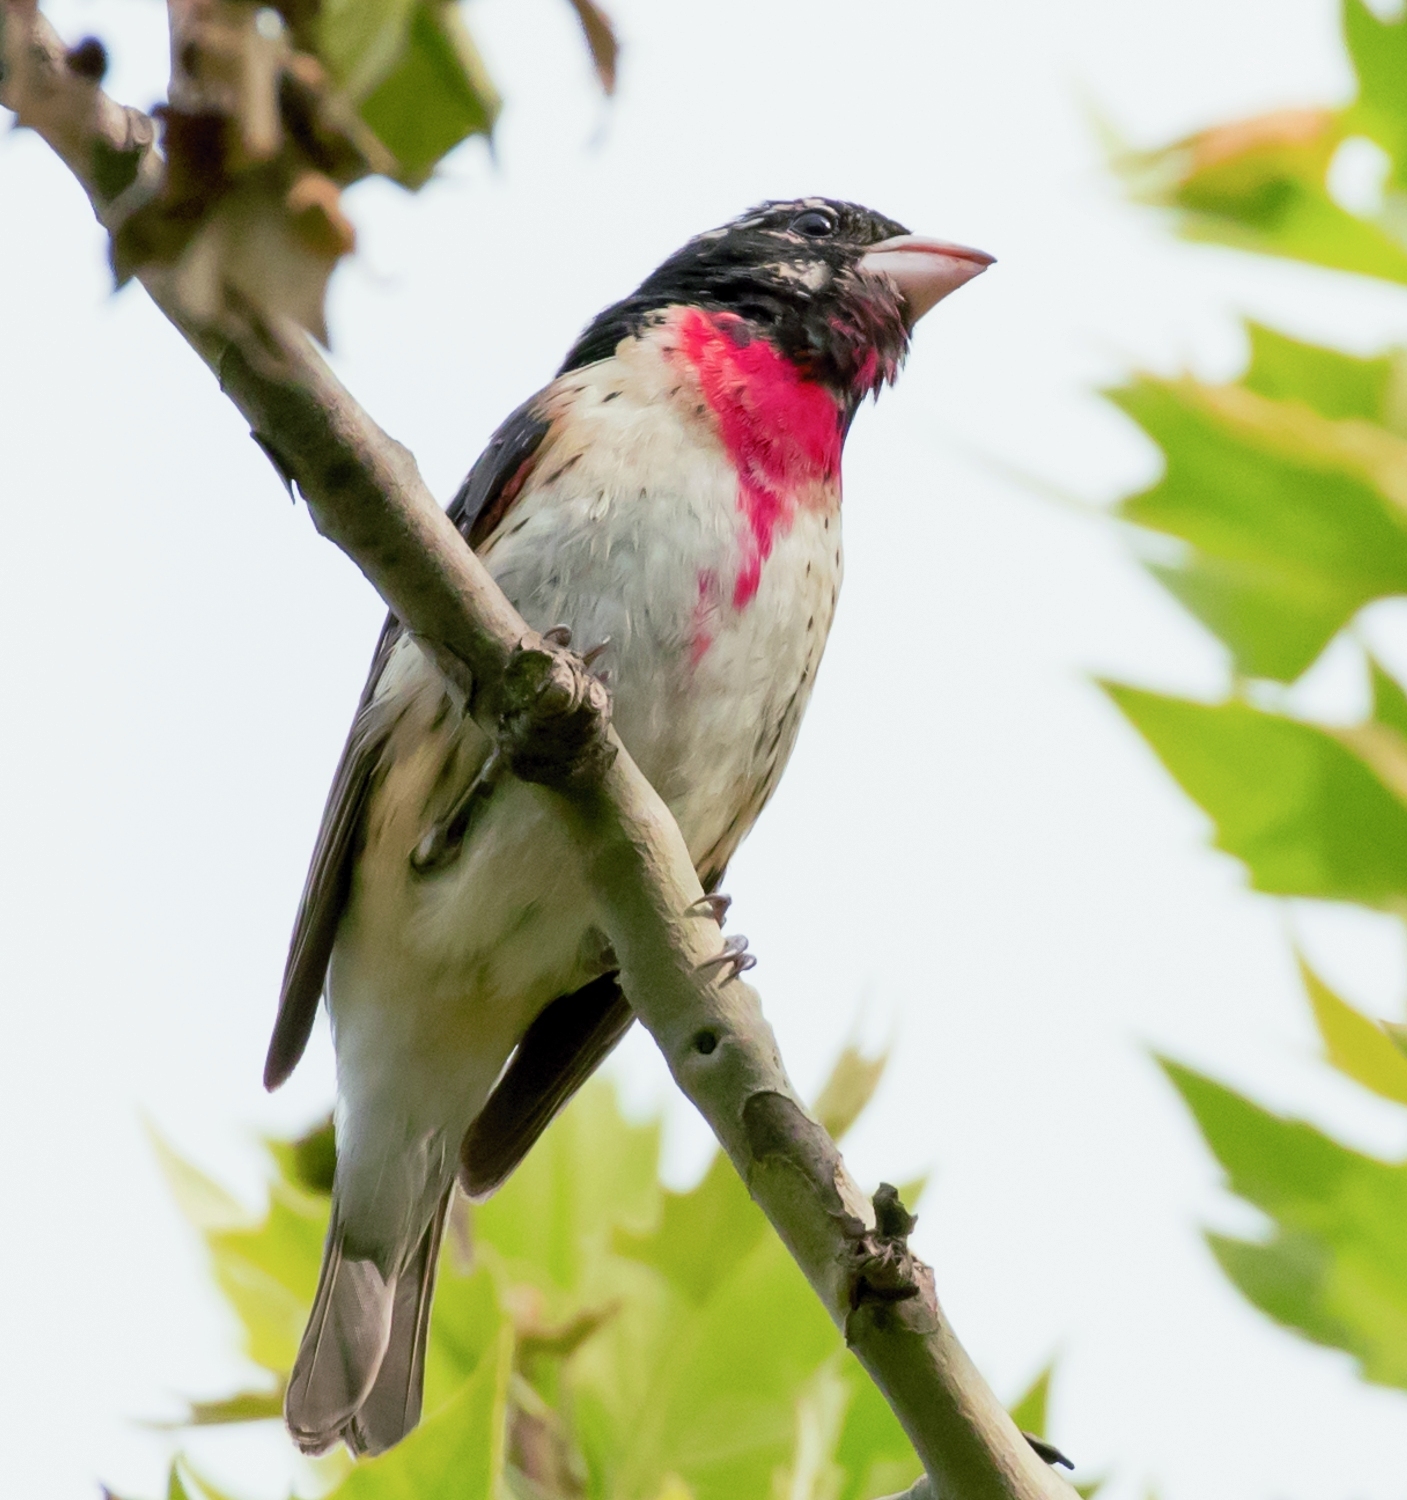 This male Rose-breasted Grosbeak paused in one of The Battery’s long-standing London Plane trees during migration. Photo: <a href="https://www.instagram.com/gailkarlsson/?hl=en" target="_blank">Gail Karlsson</a>